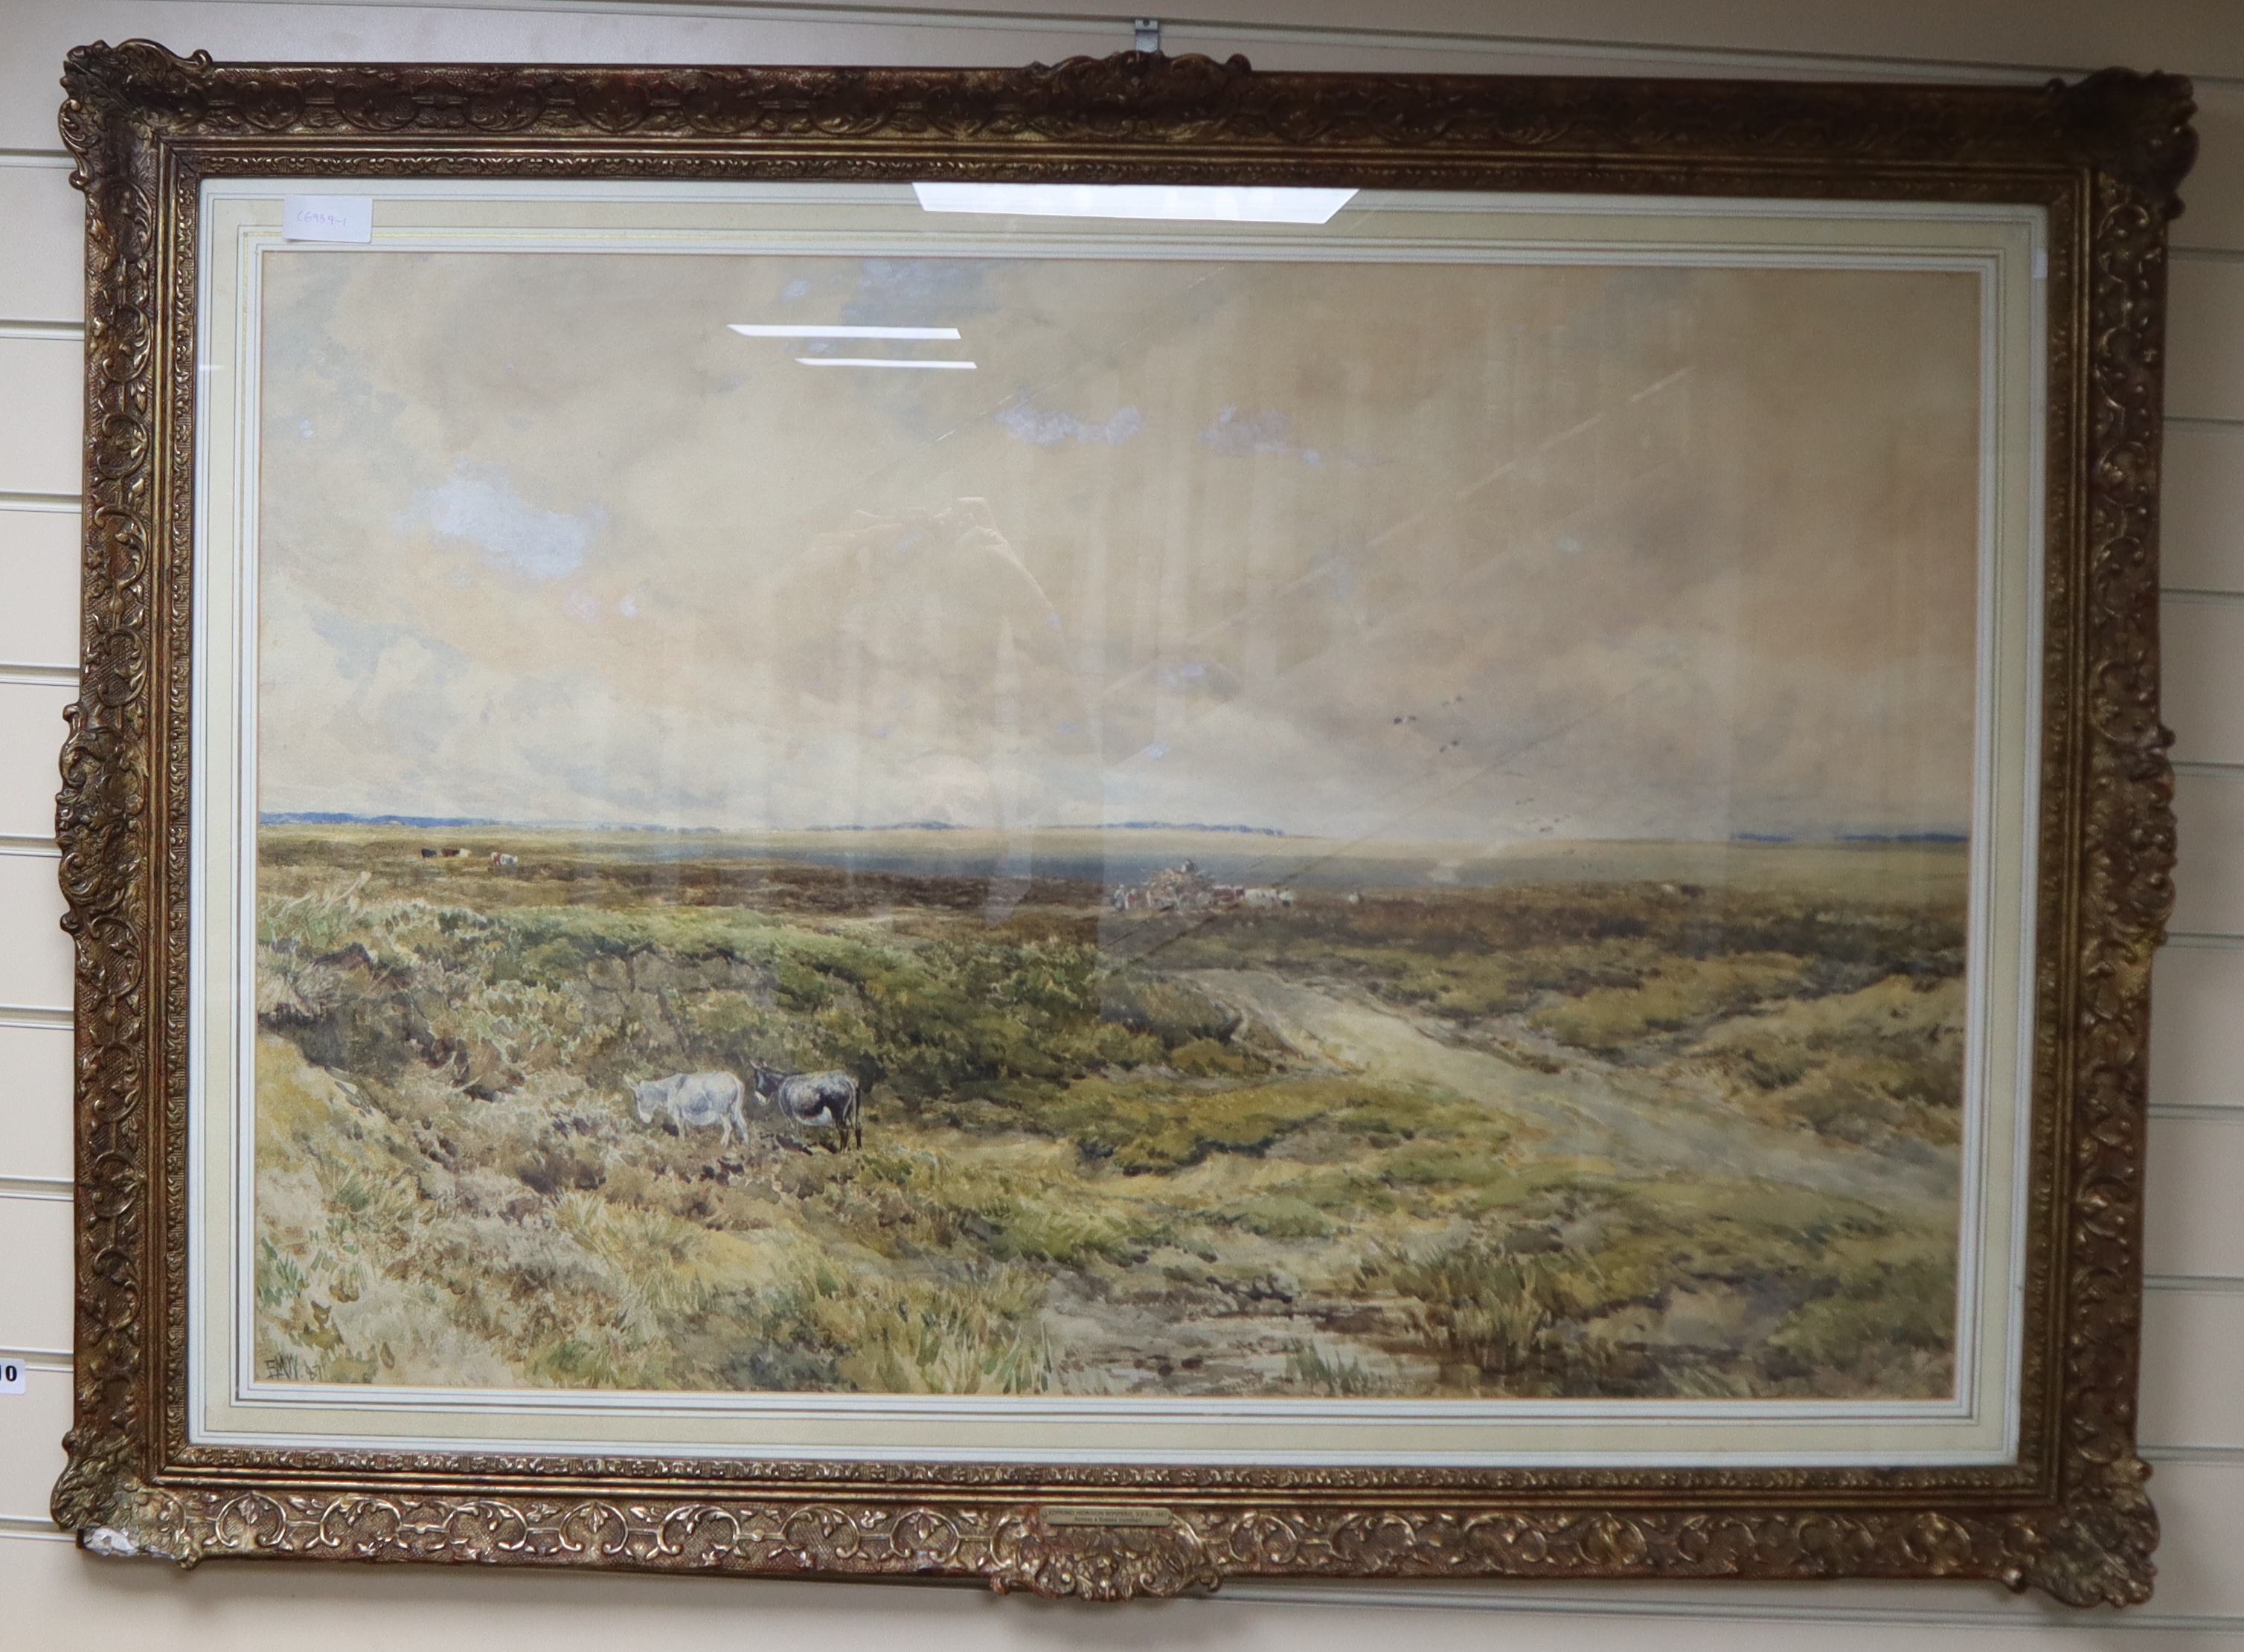 Edmund Morison Wimperis (1835-1900), watercolour, 'Across a Sussex Common', signed and dated '87, 64